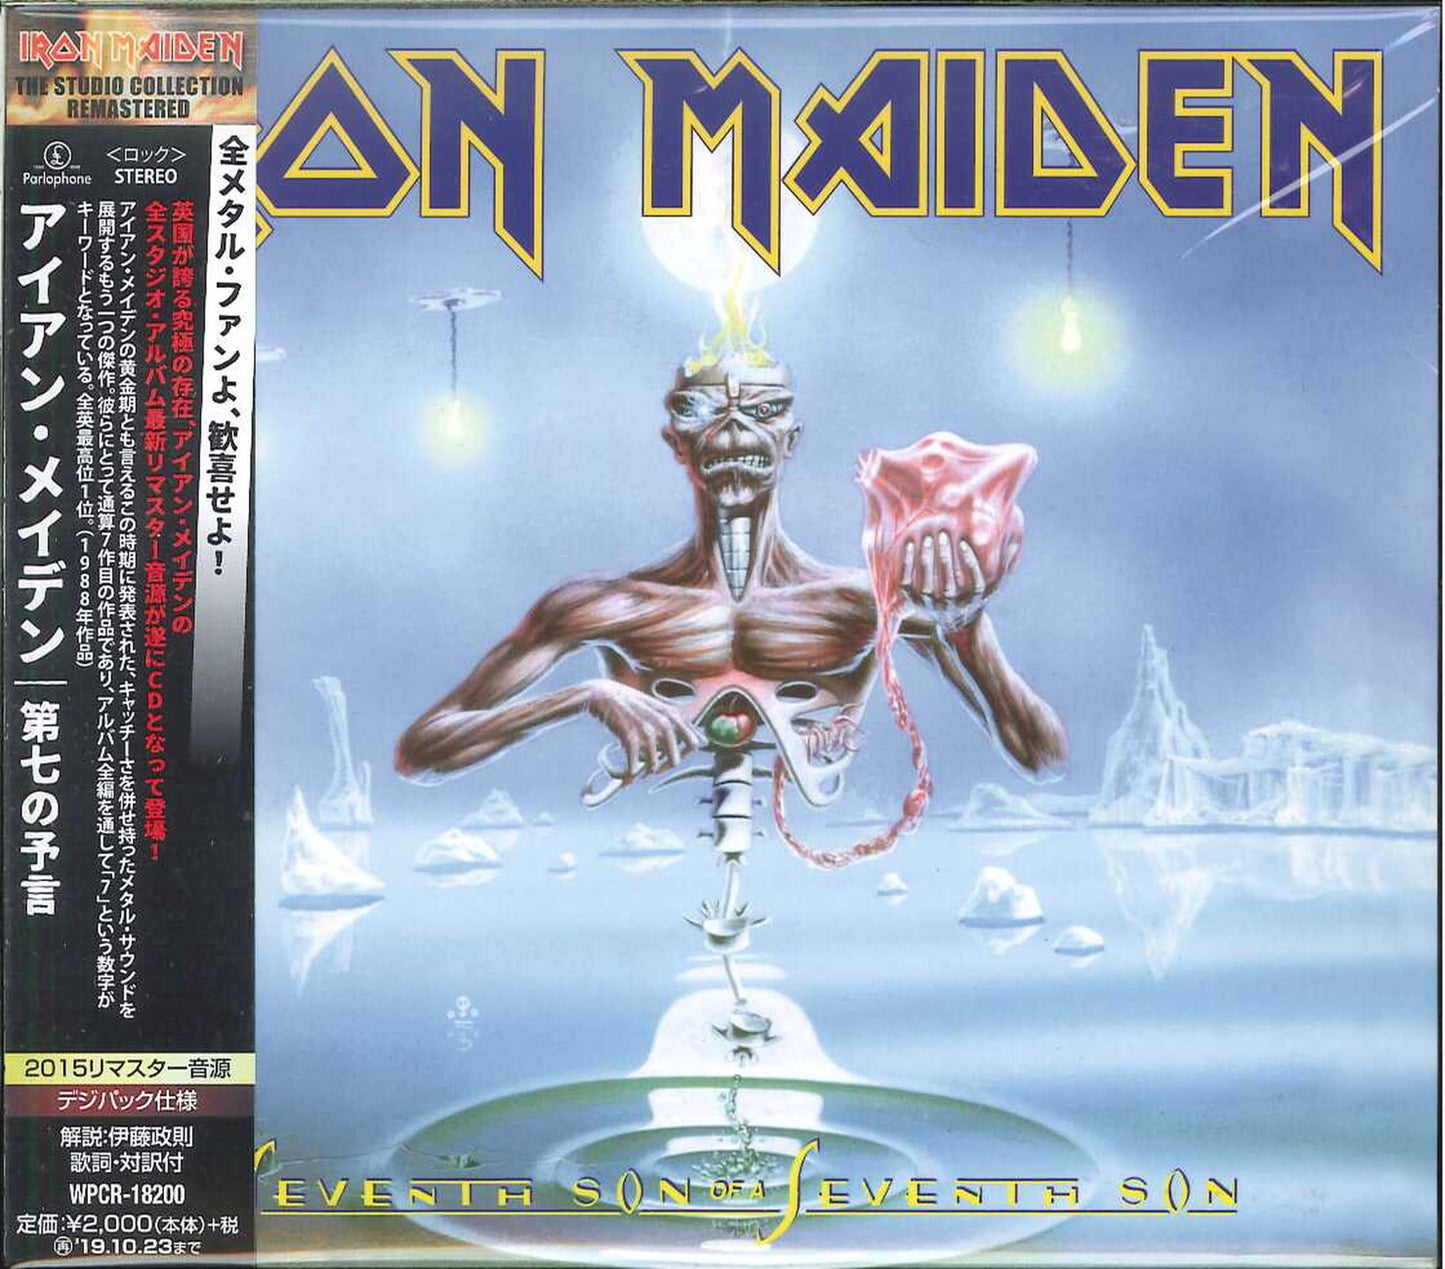 Iron Maiden - Seventh Son Of A Seventh Son (Release year: 2019) - Japan CD